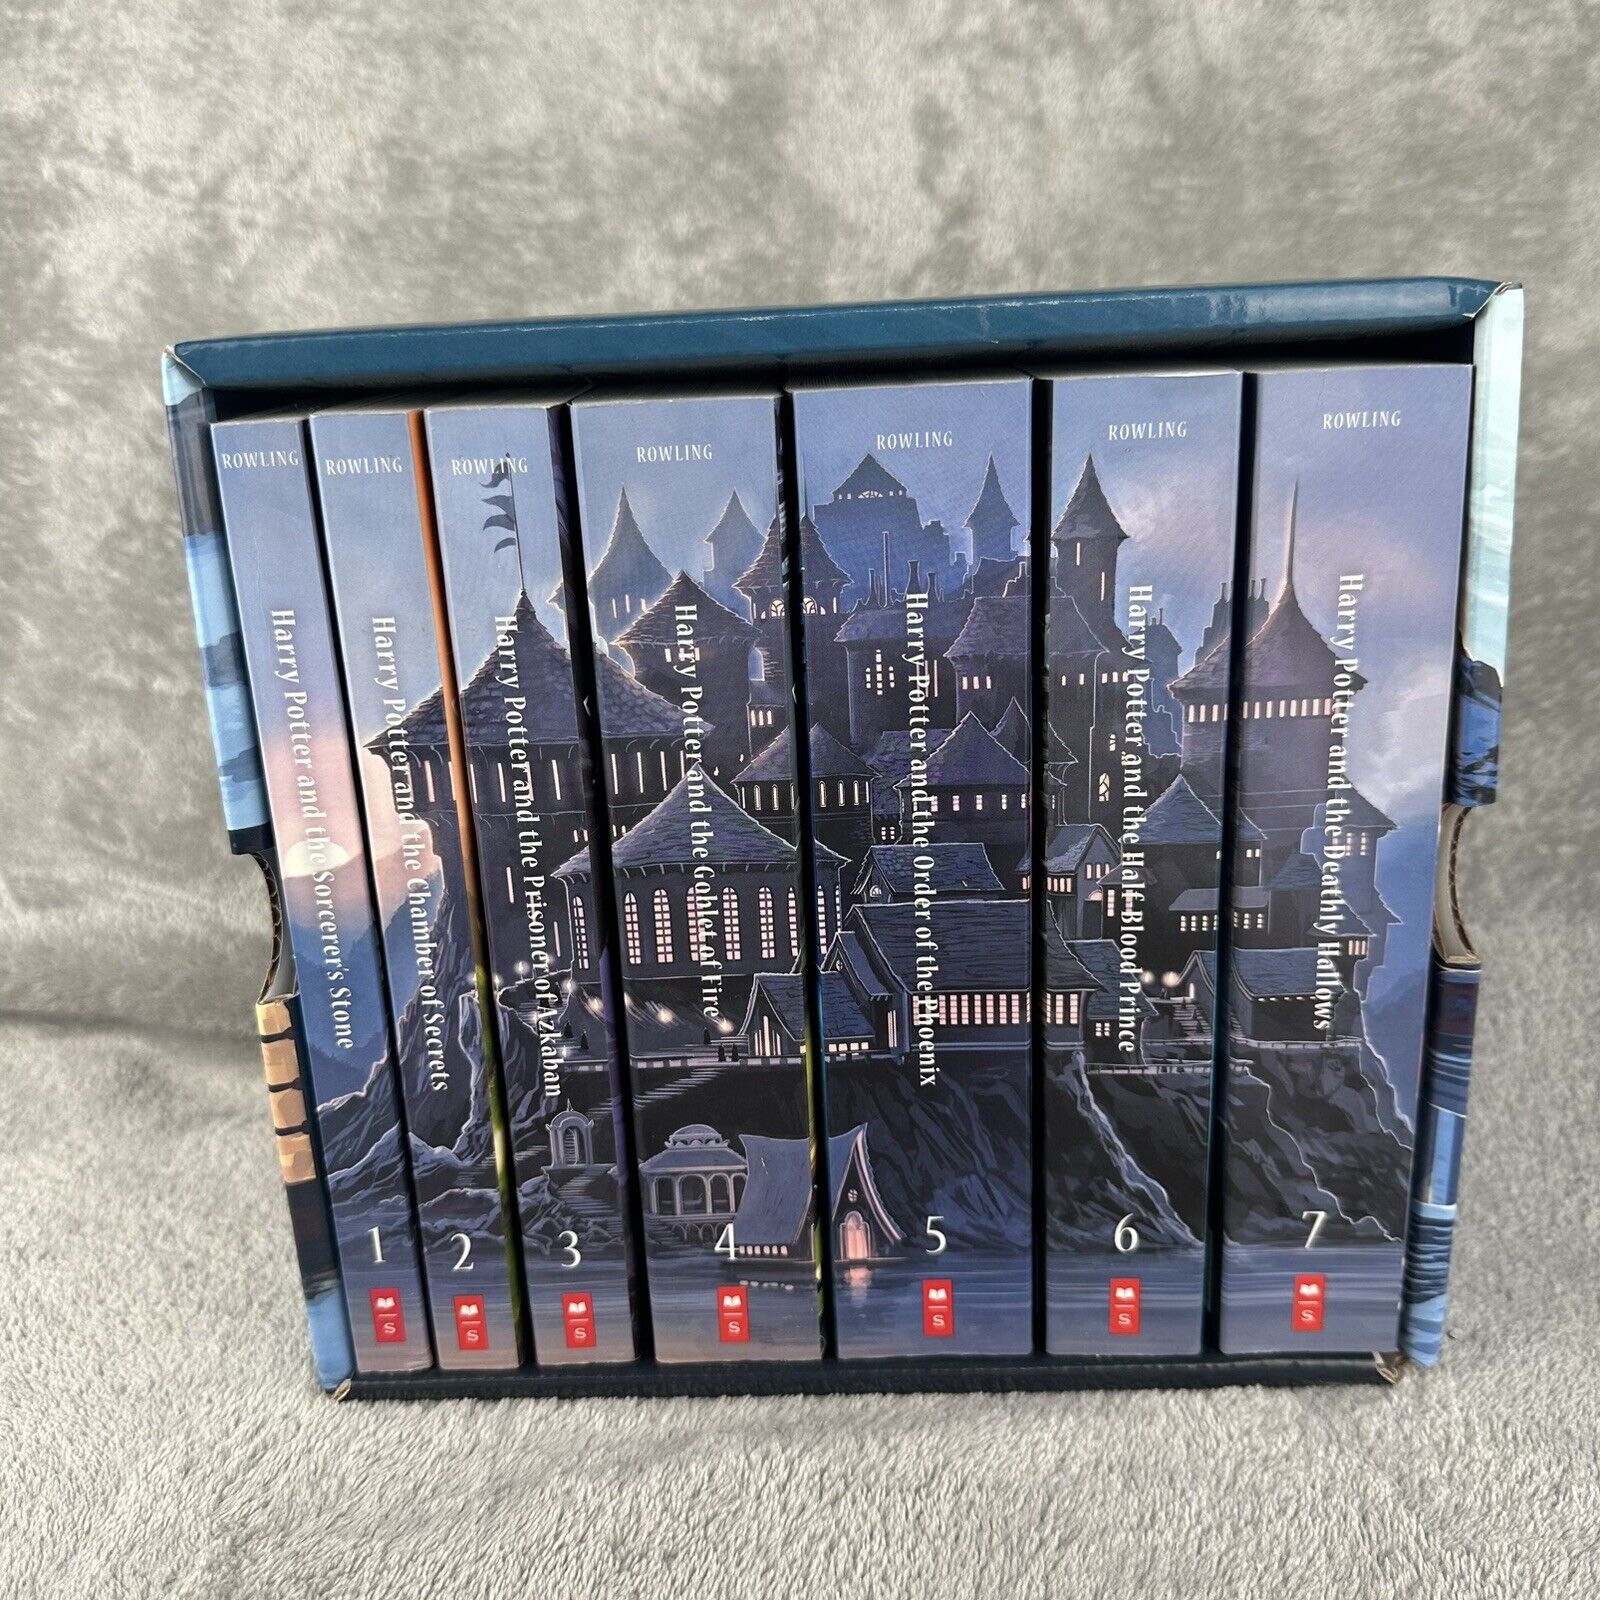 Harry Potter Books The Complete Series Set 1-7 Paperback